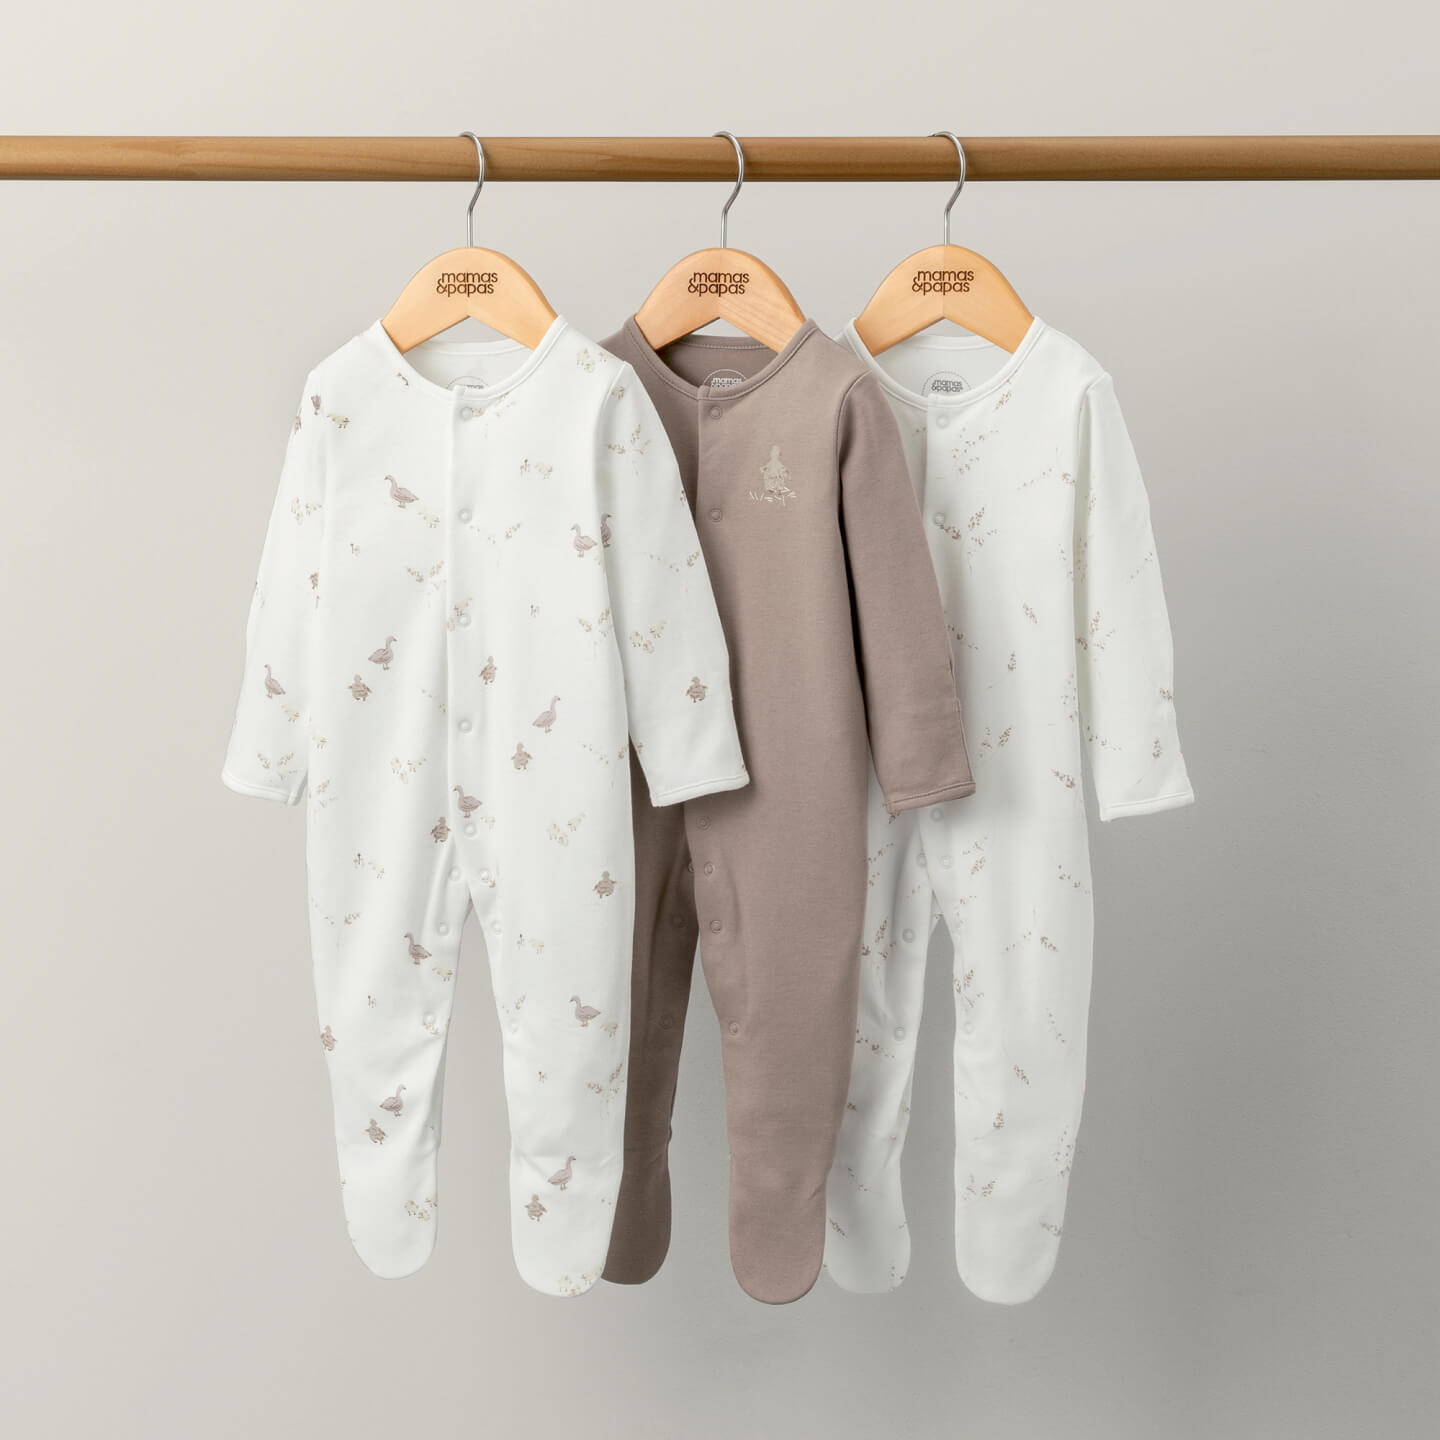 Three neutral baby grows hung up